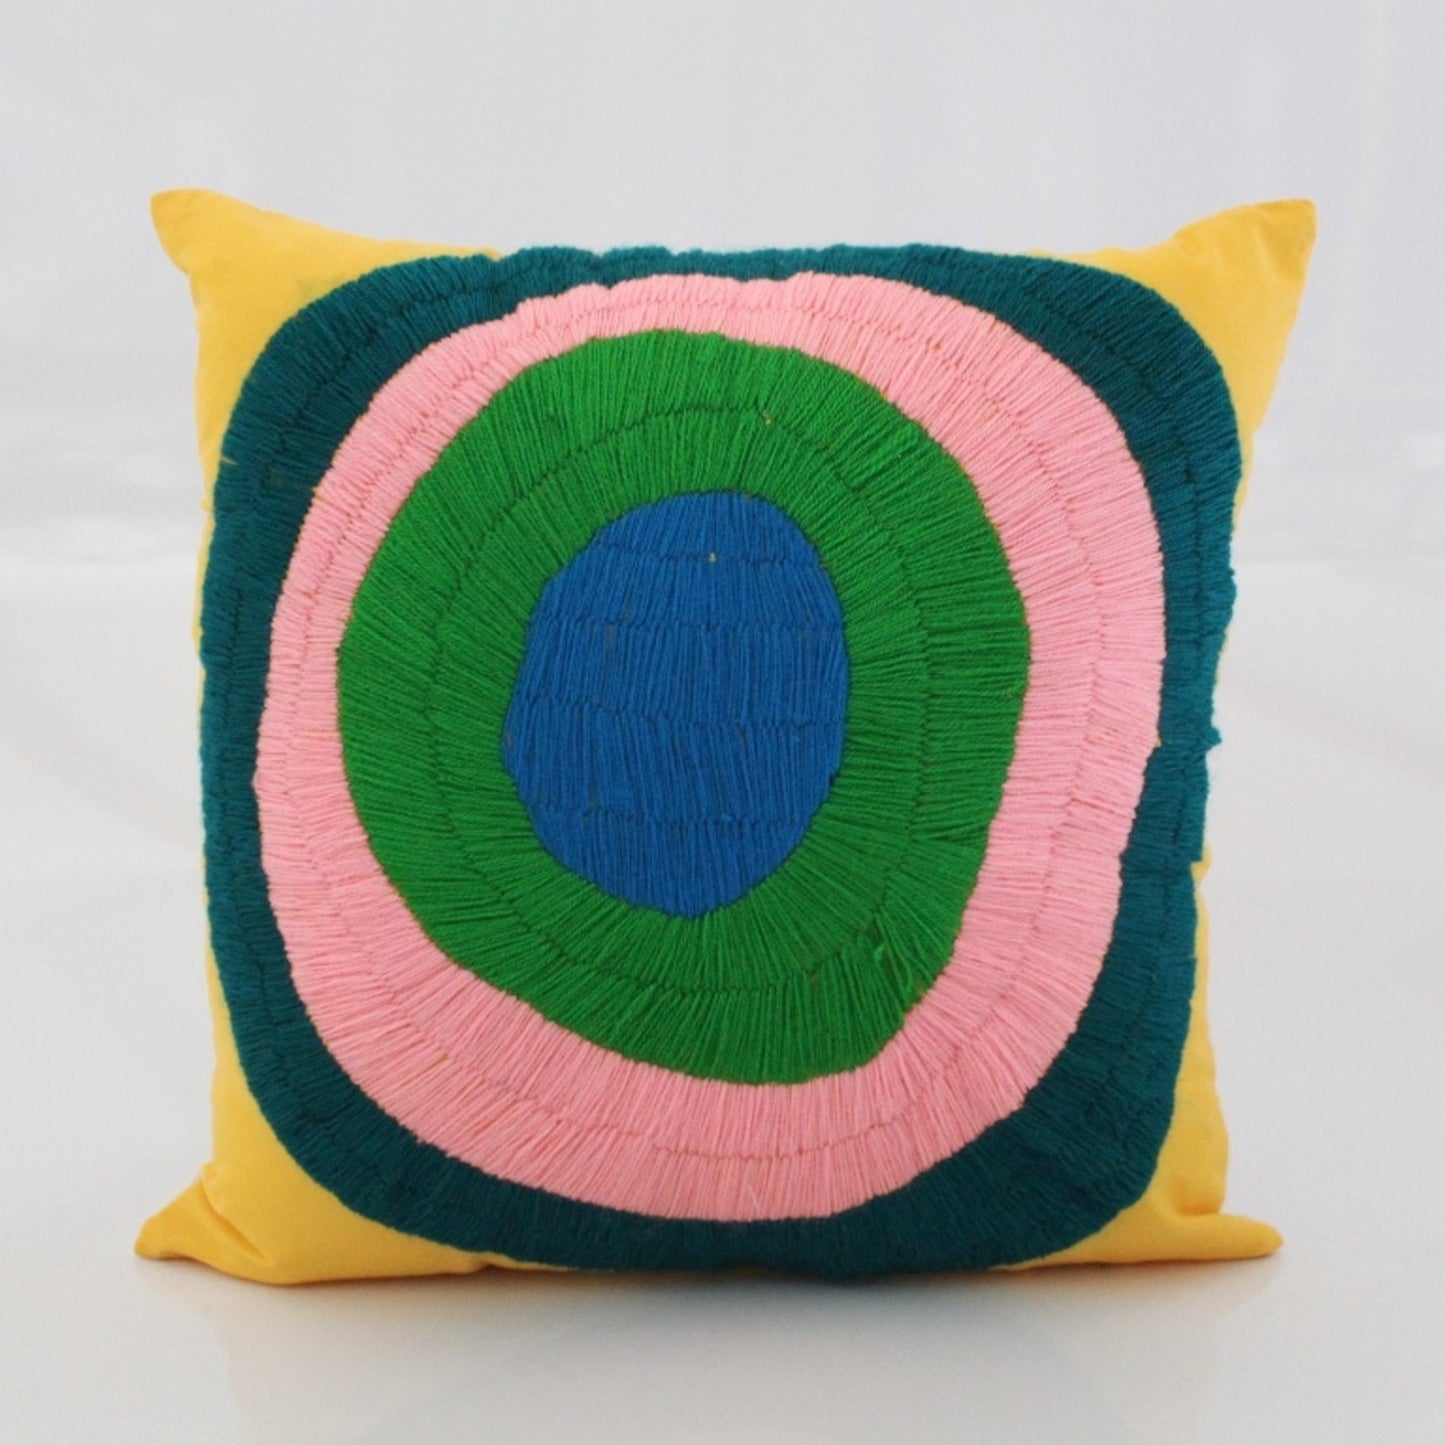 Embroidered pillow cover 16"x16" - Circles TURQUOISE